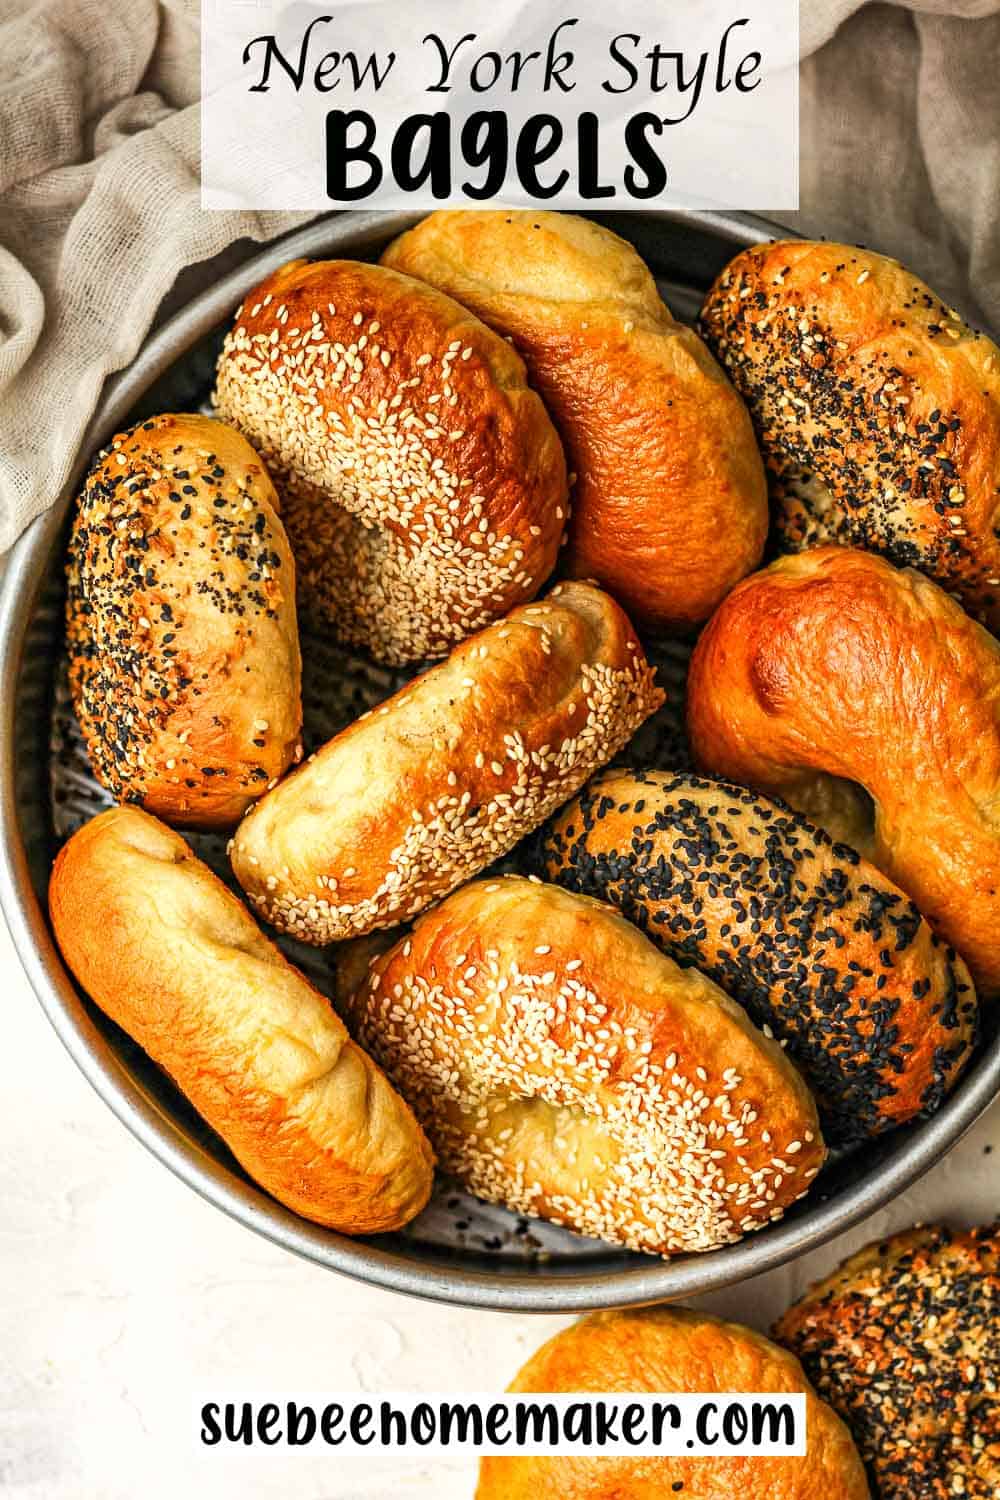 A round pan of New York Style Bagels with various toppings.